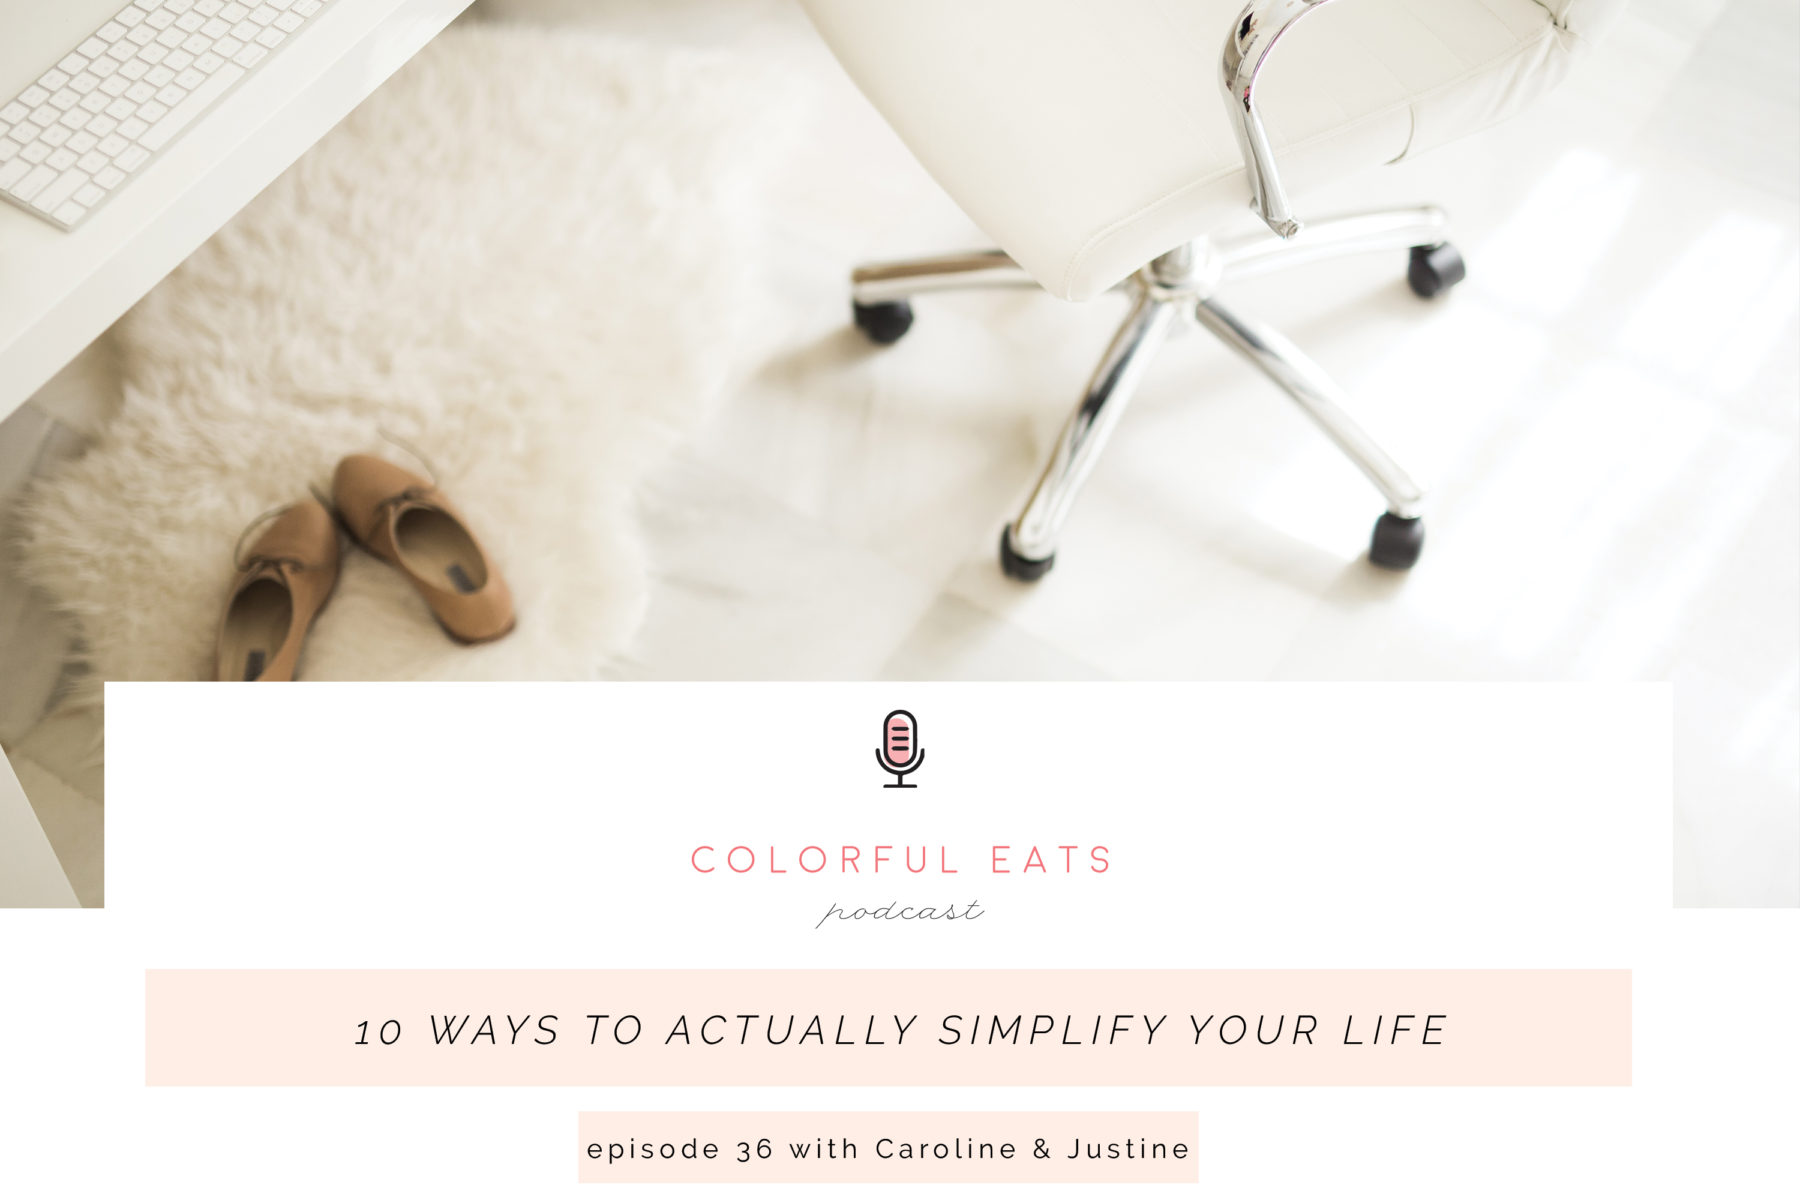 Colorful Eats Podcast Episode 36: 10 Ways to Actually Simplify Your Life